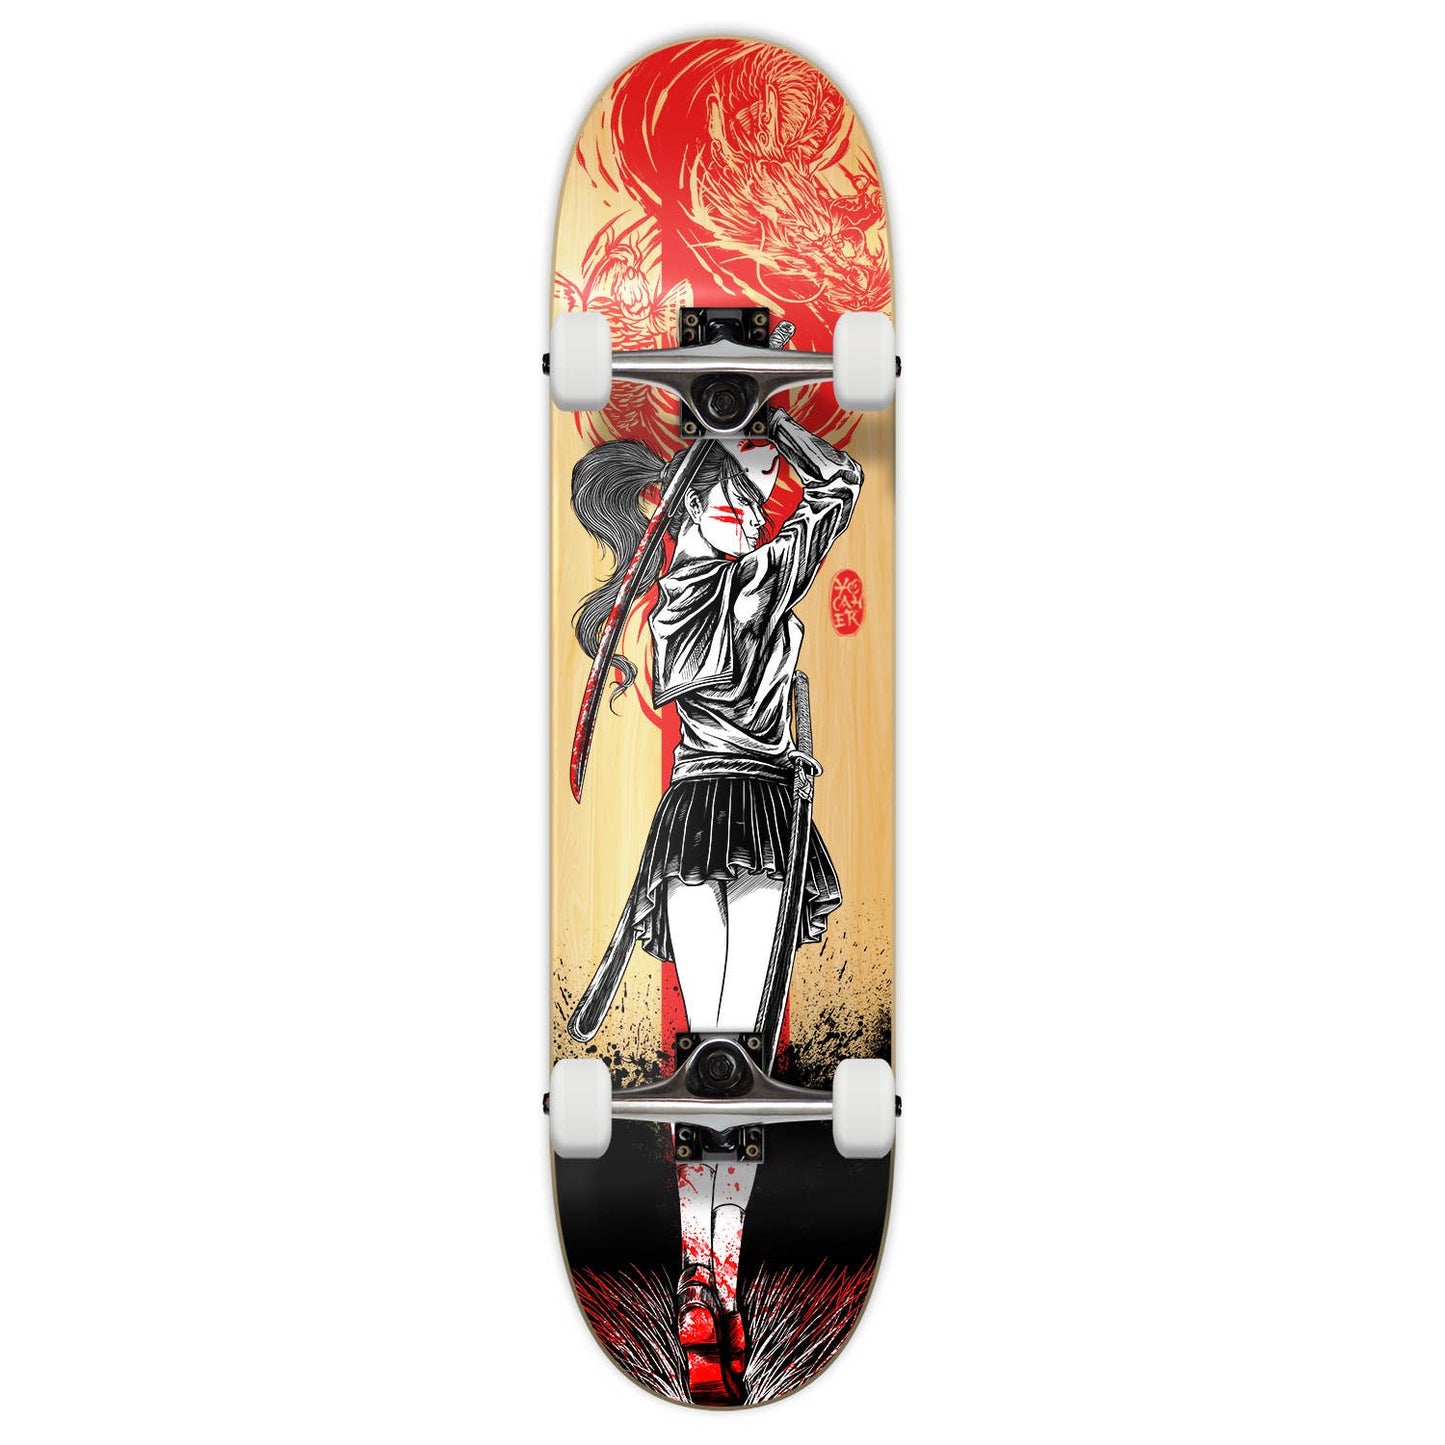 Yocaher Graphic Complete Skateboard 7.75" - Red Dragon